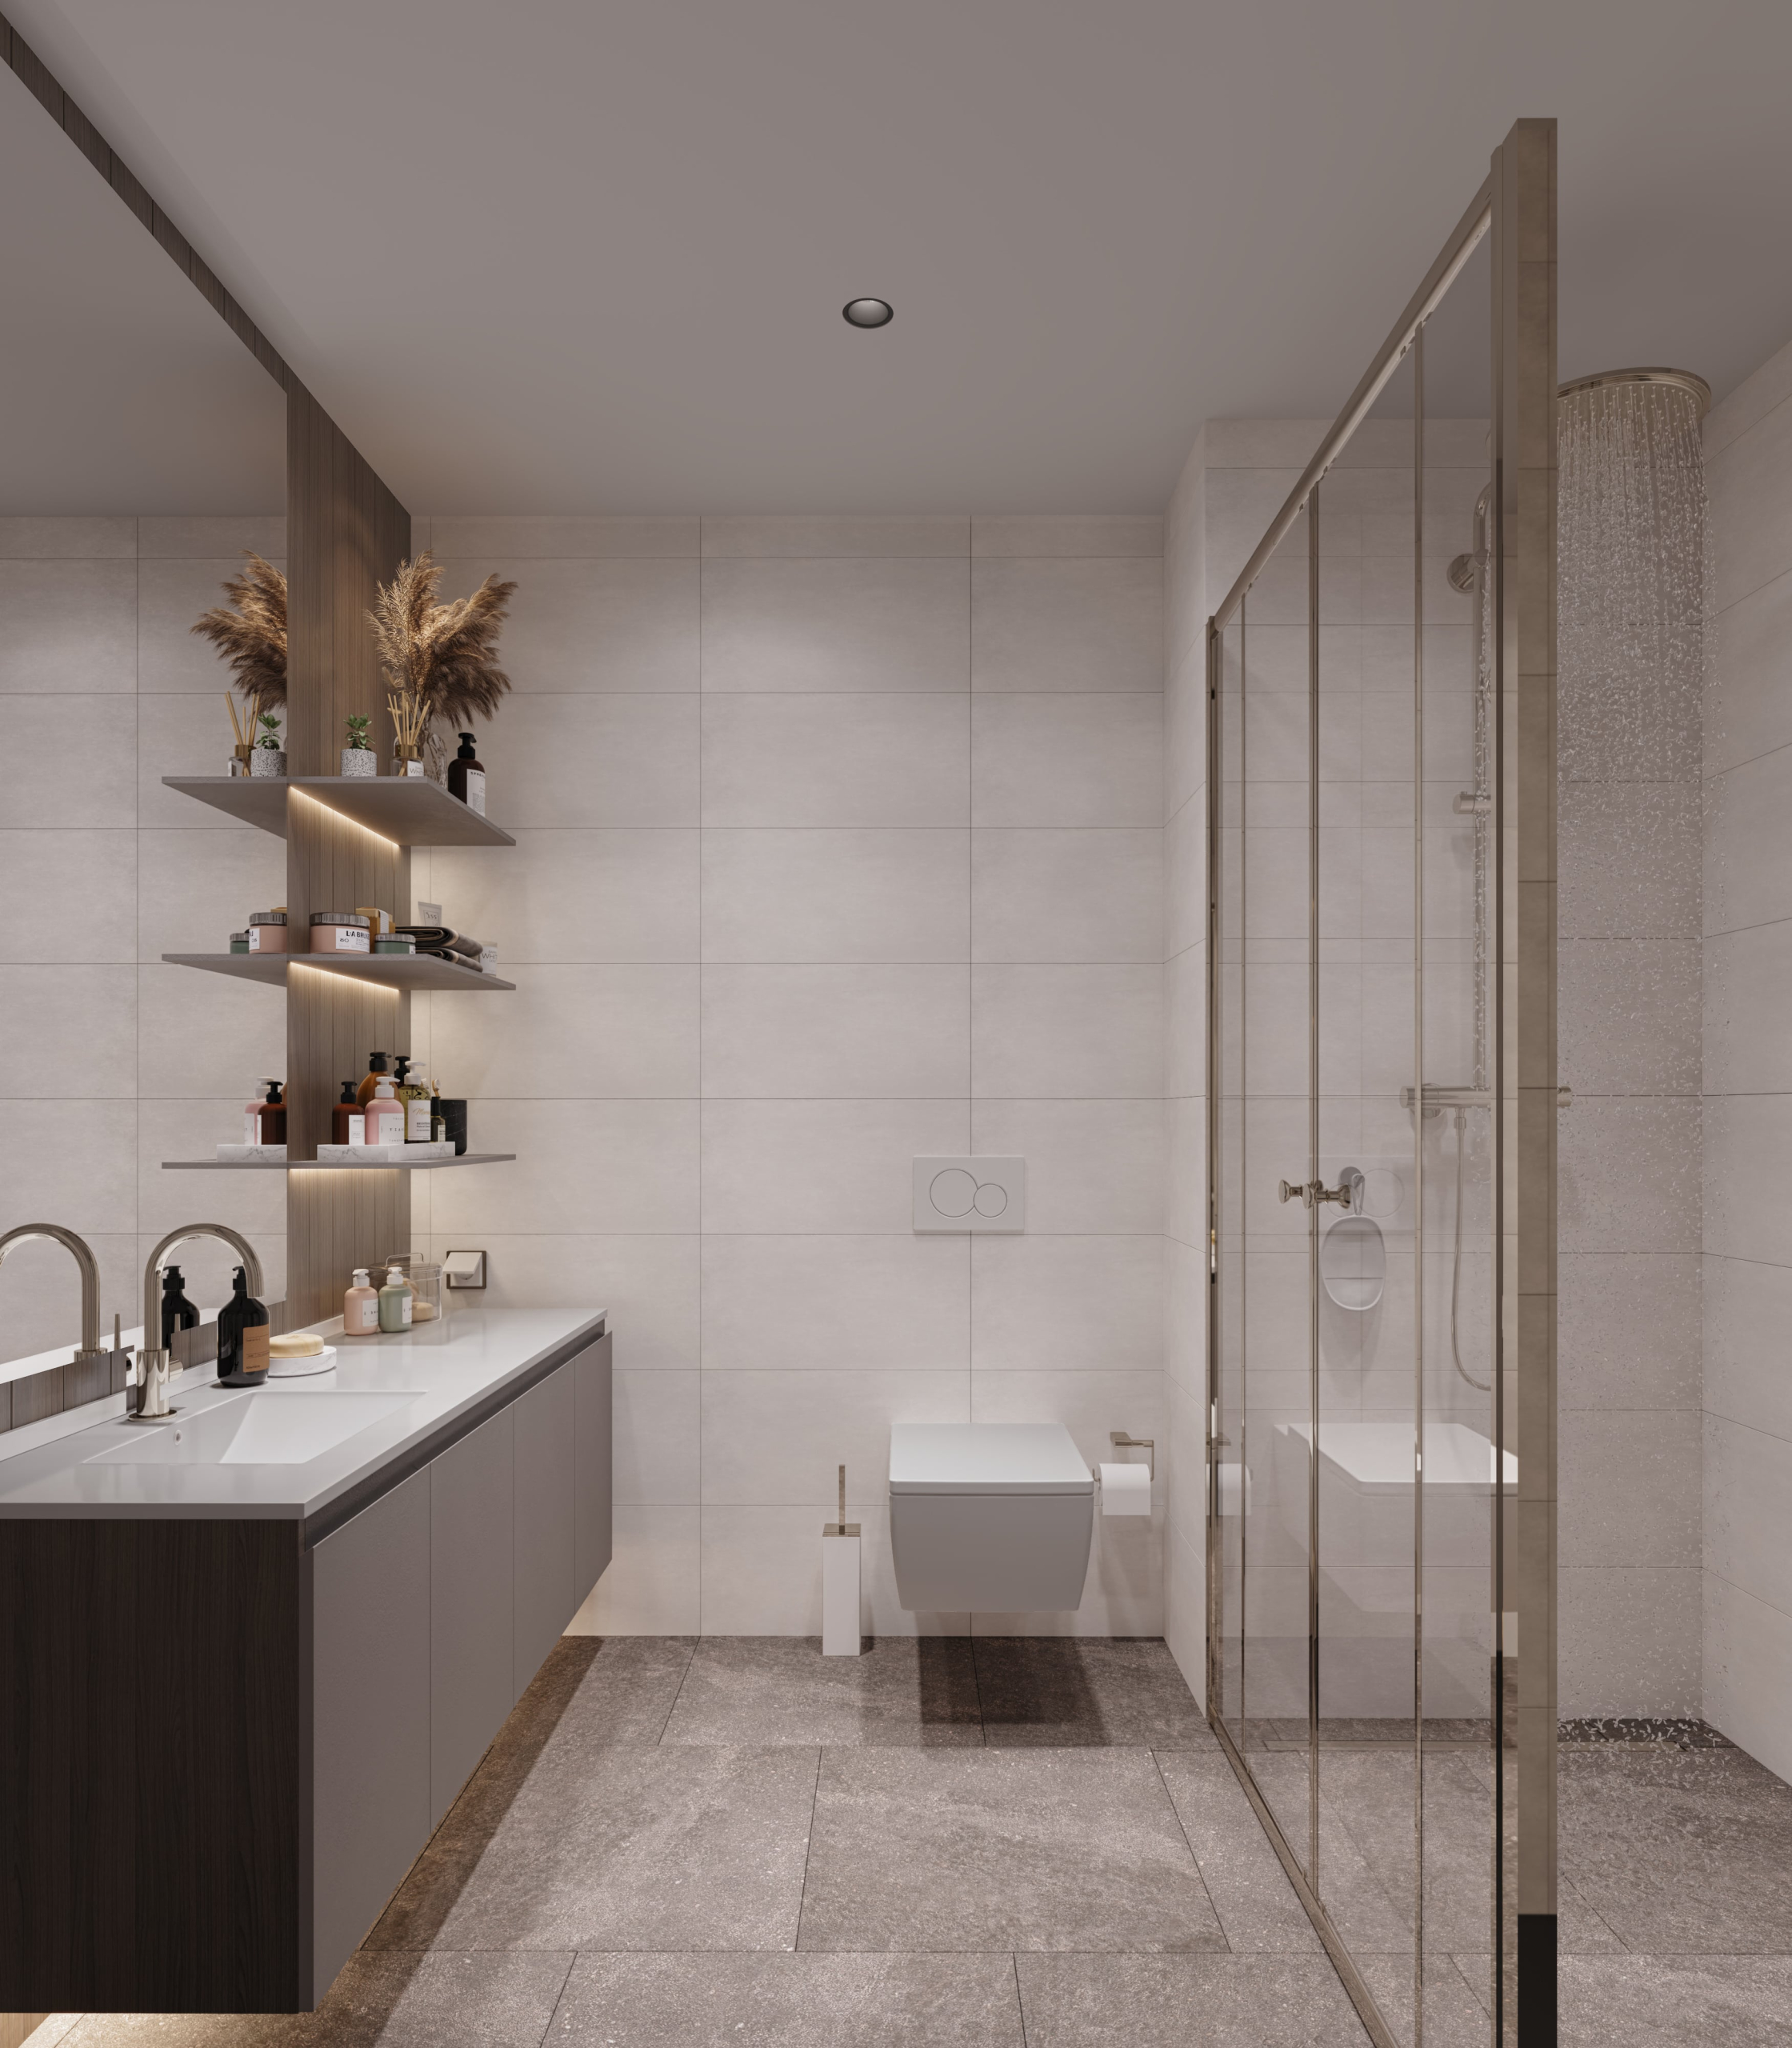 Fine marbles and cermaic used in wet areas such as toilets and kitchens in Arkatlie Evler